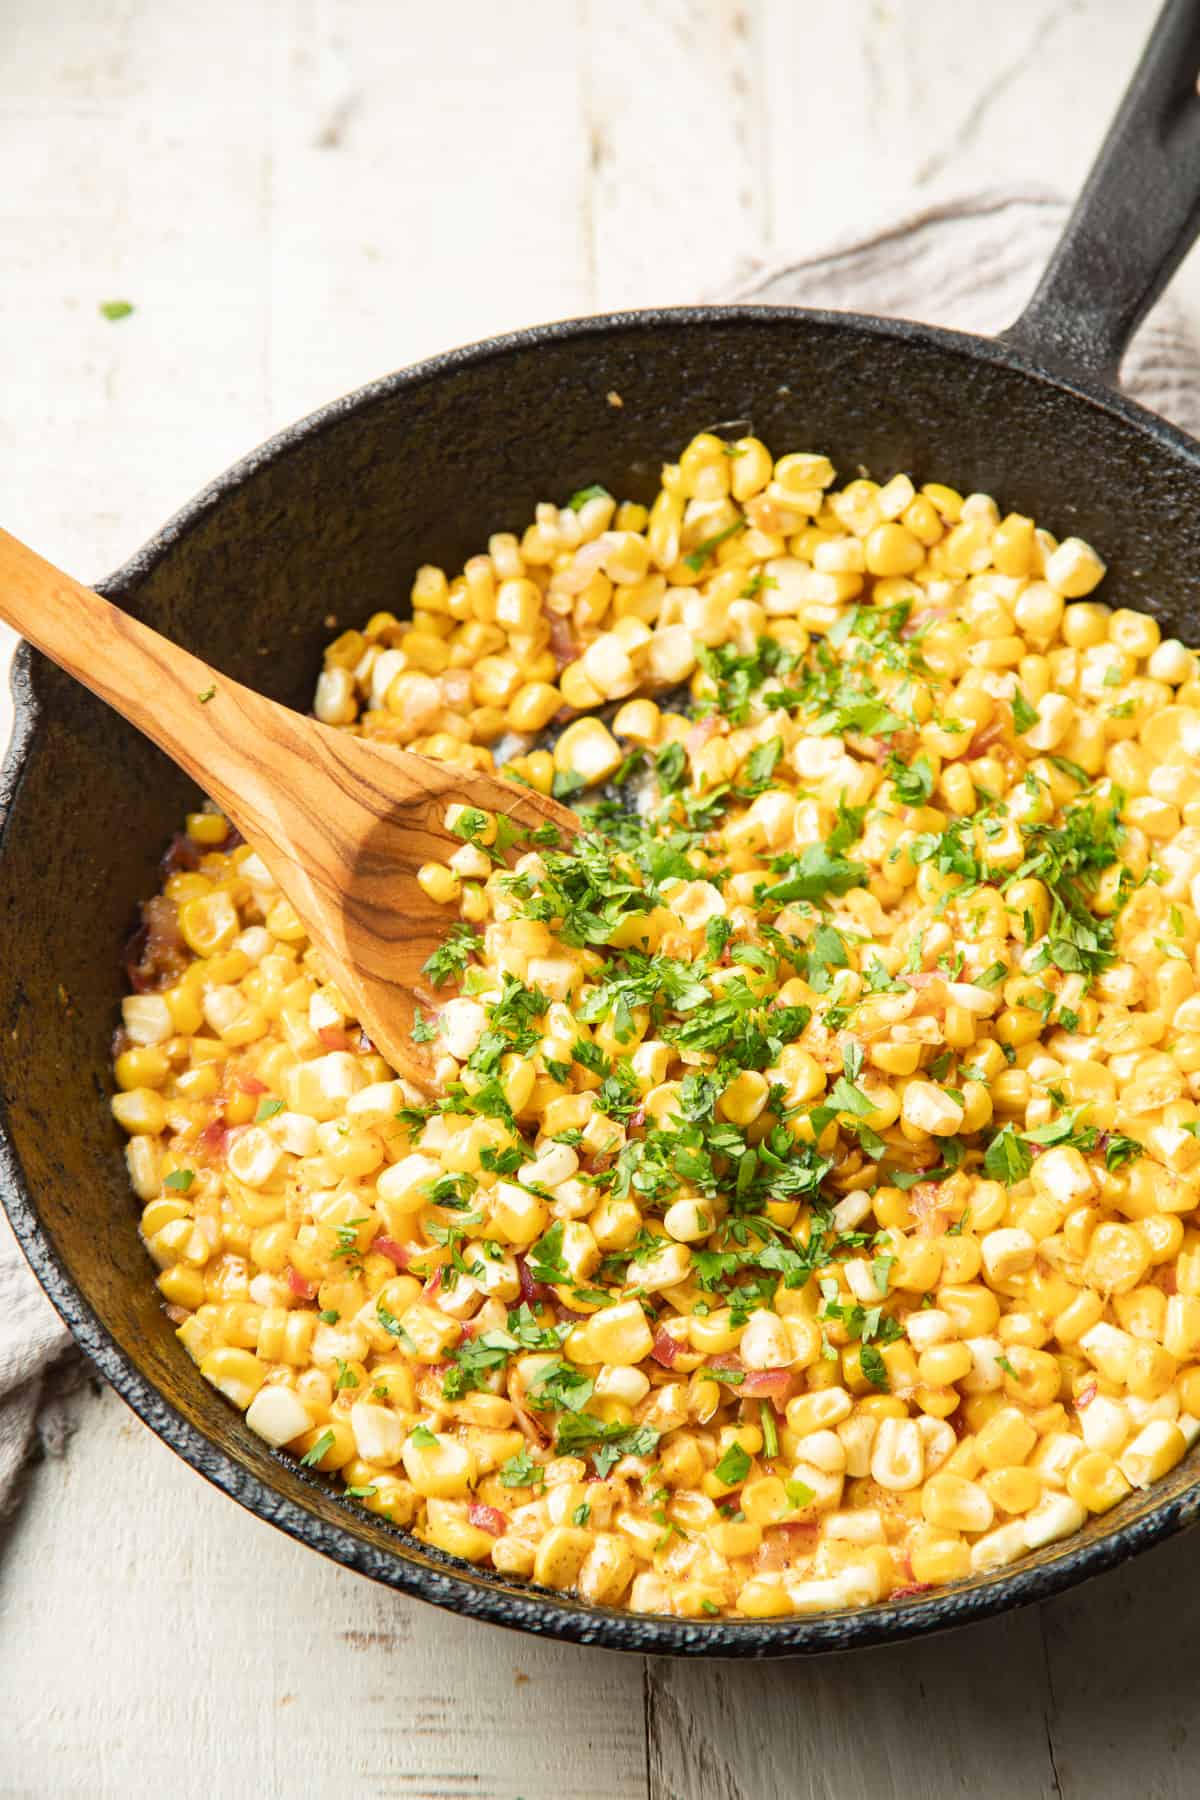 Street corn taco filling in a skillet with a wooden spoon.